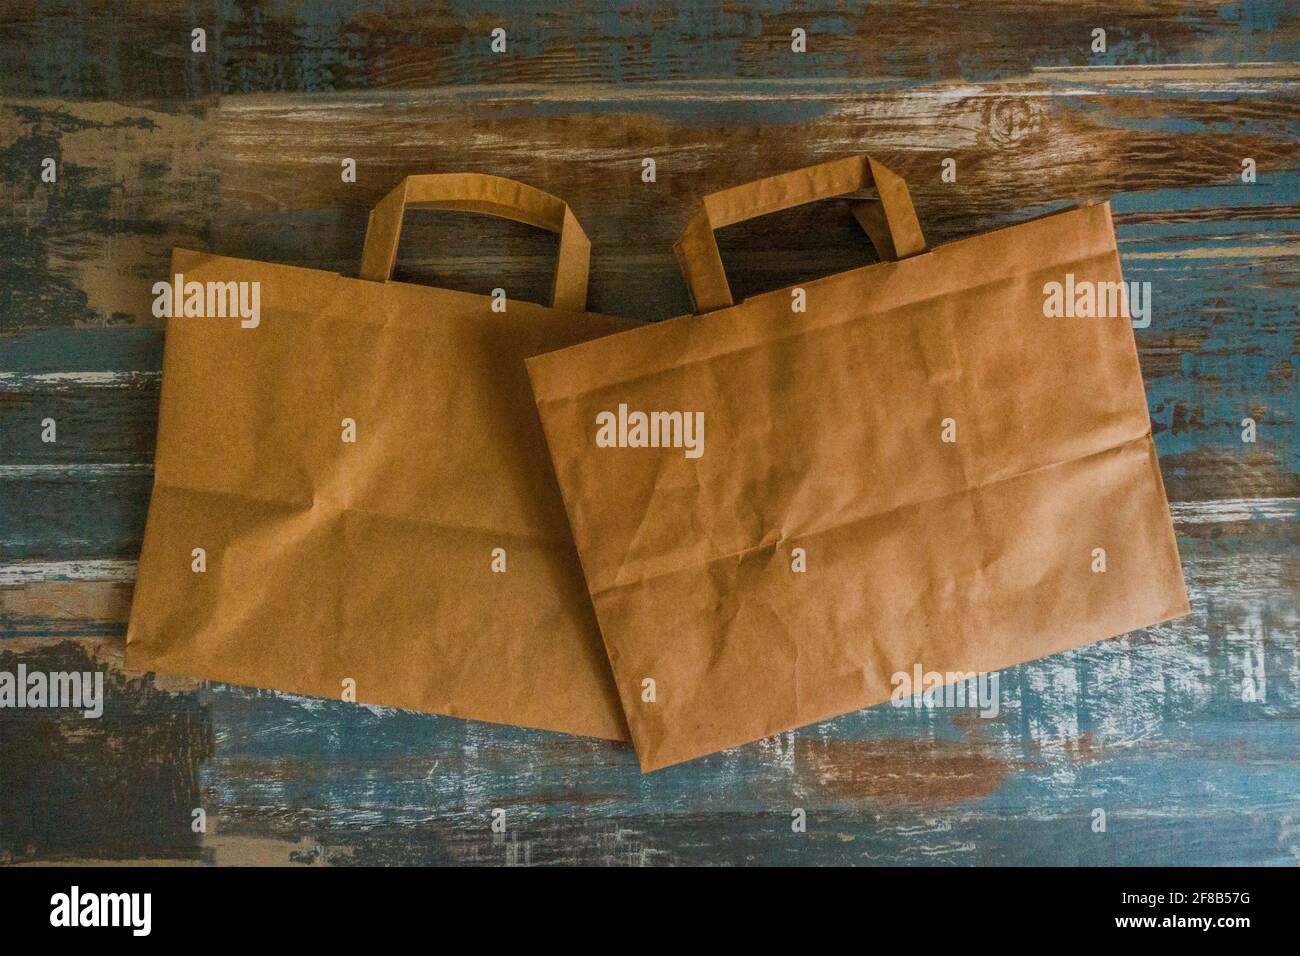 paper bags on a wood material surface Stock Photo